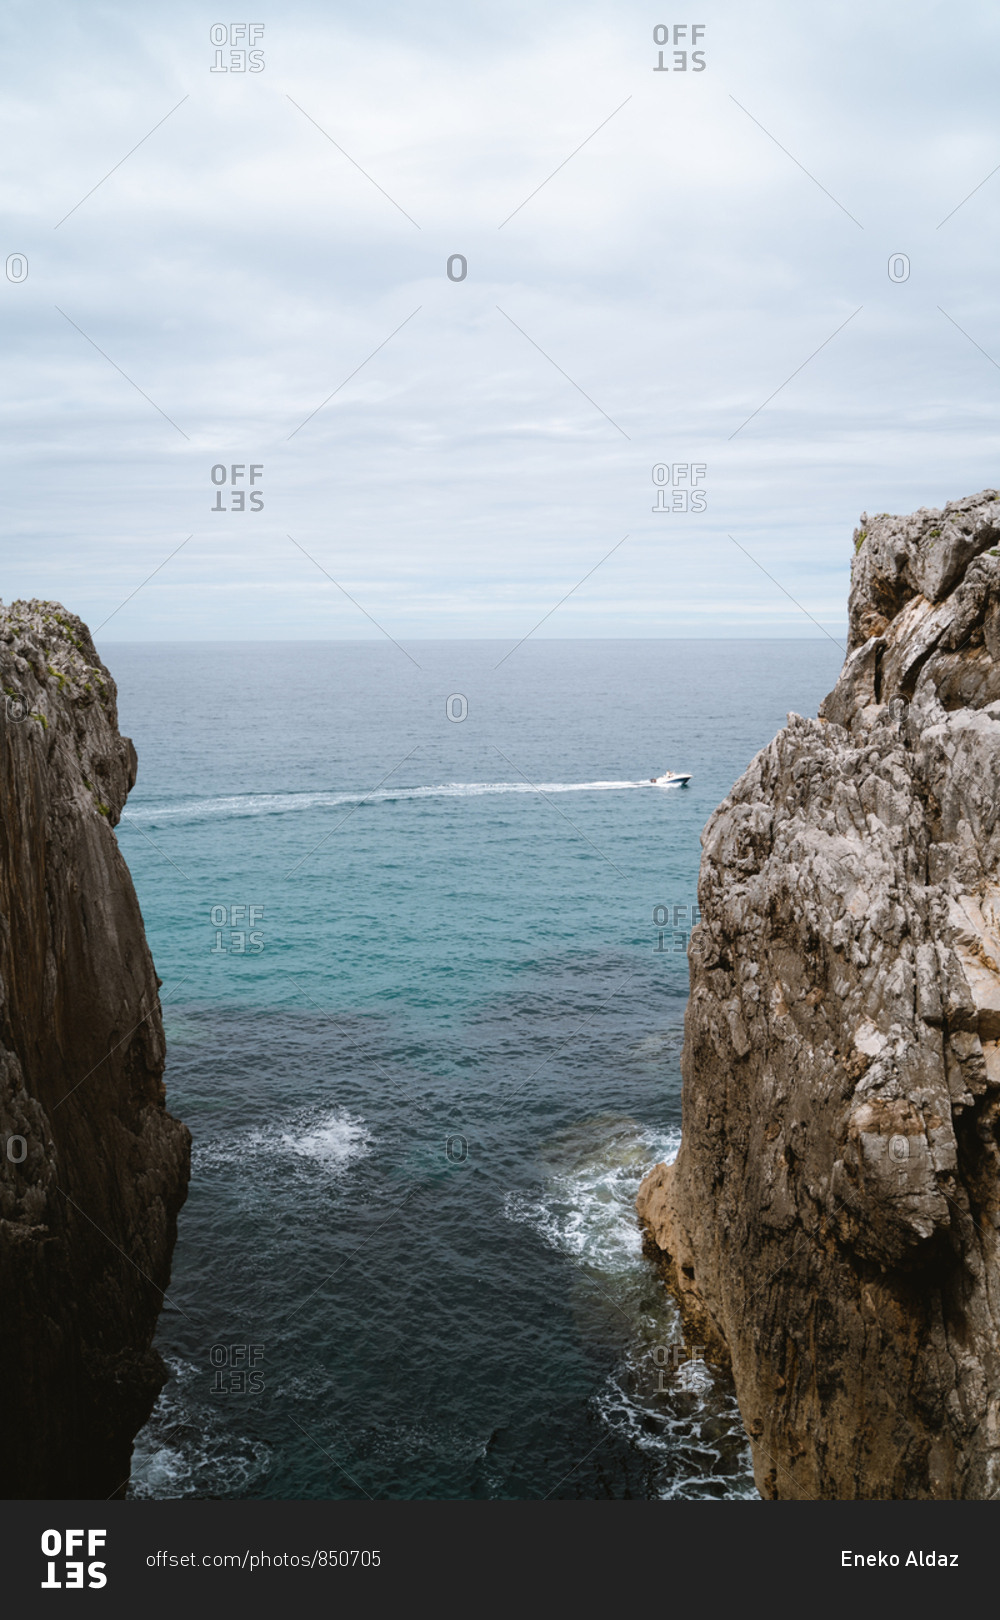 Small boat passing between two cliffs